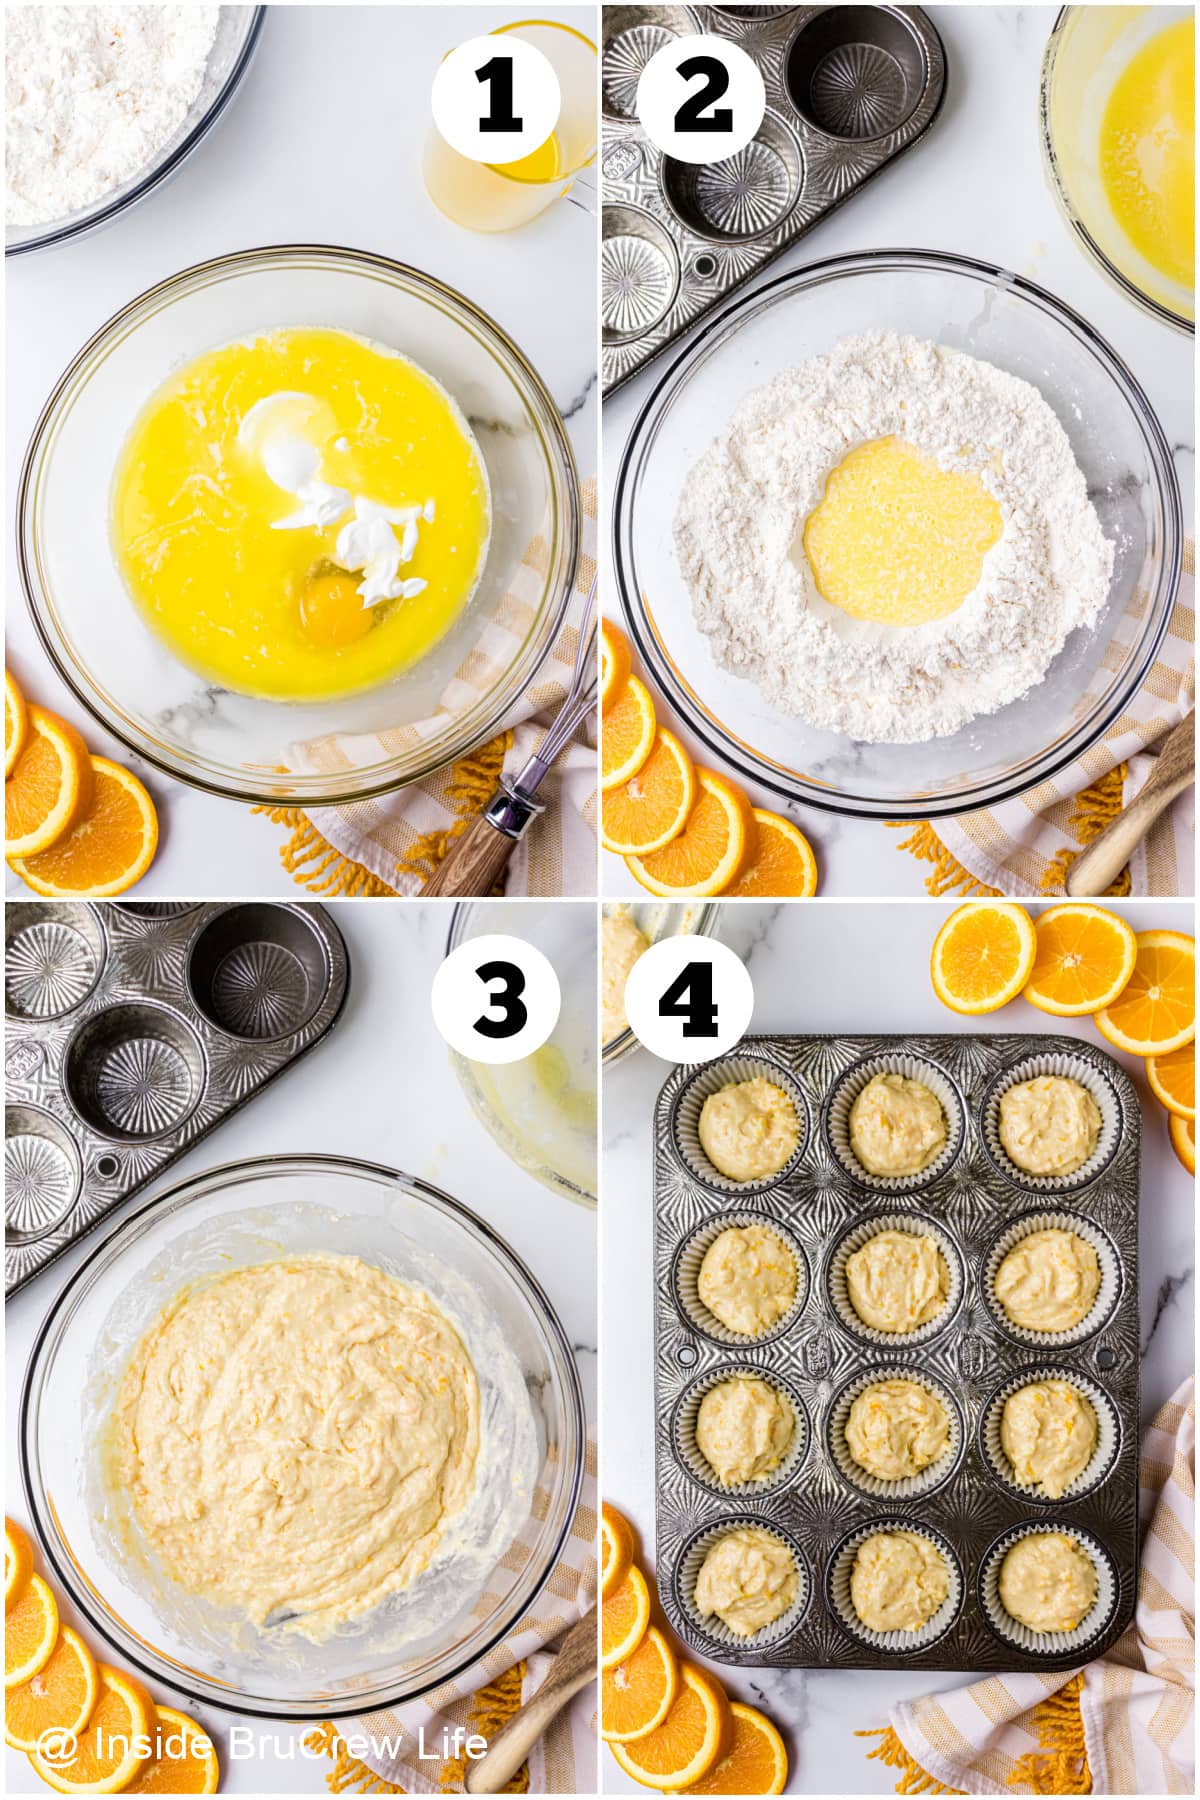 Four pictures collaged together showing how to make muffins with orange juice and zest.